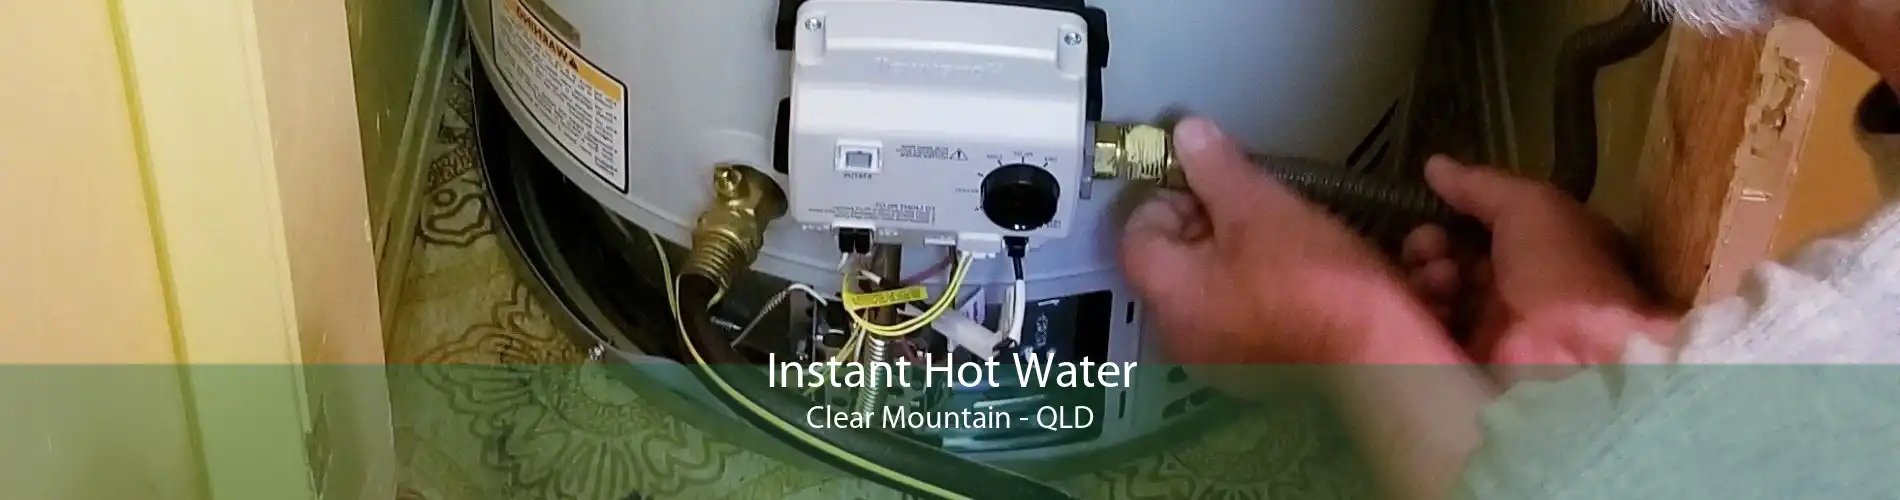 Instant Hot Water Clear Mountain - QLD